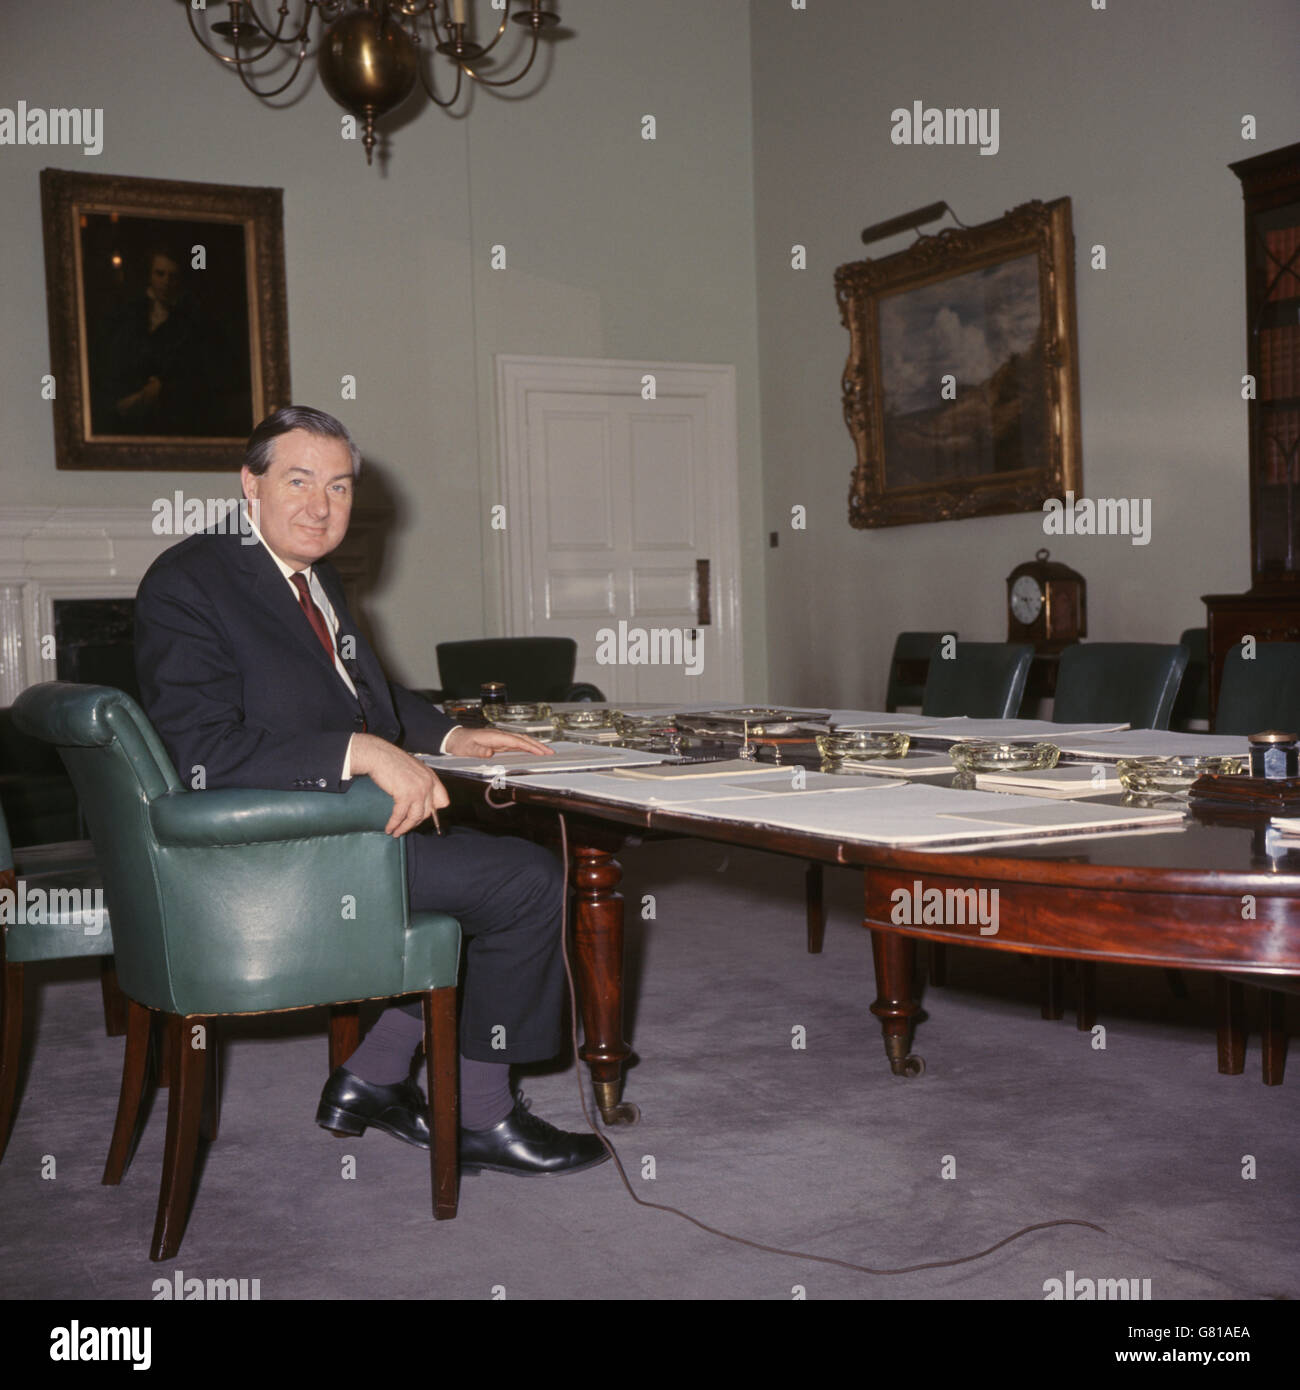 Mr James Callaghan, the Chancellor of the Exchequer, at The Treasury, Great George Street, London. Stock Photo